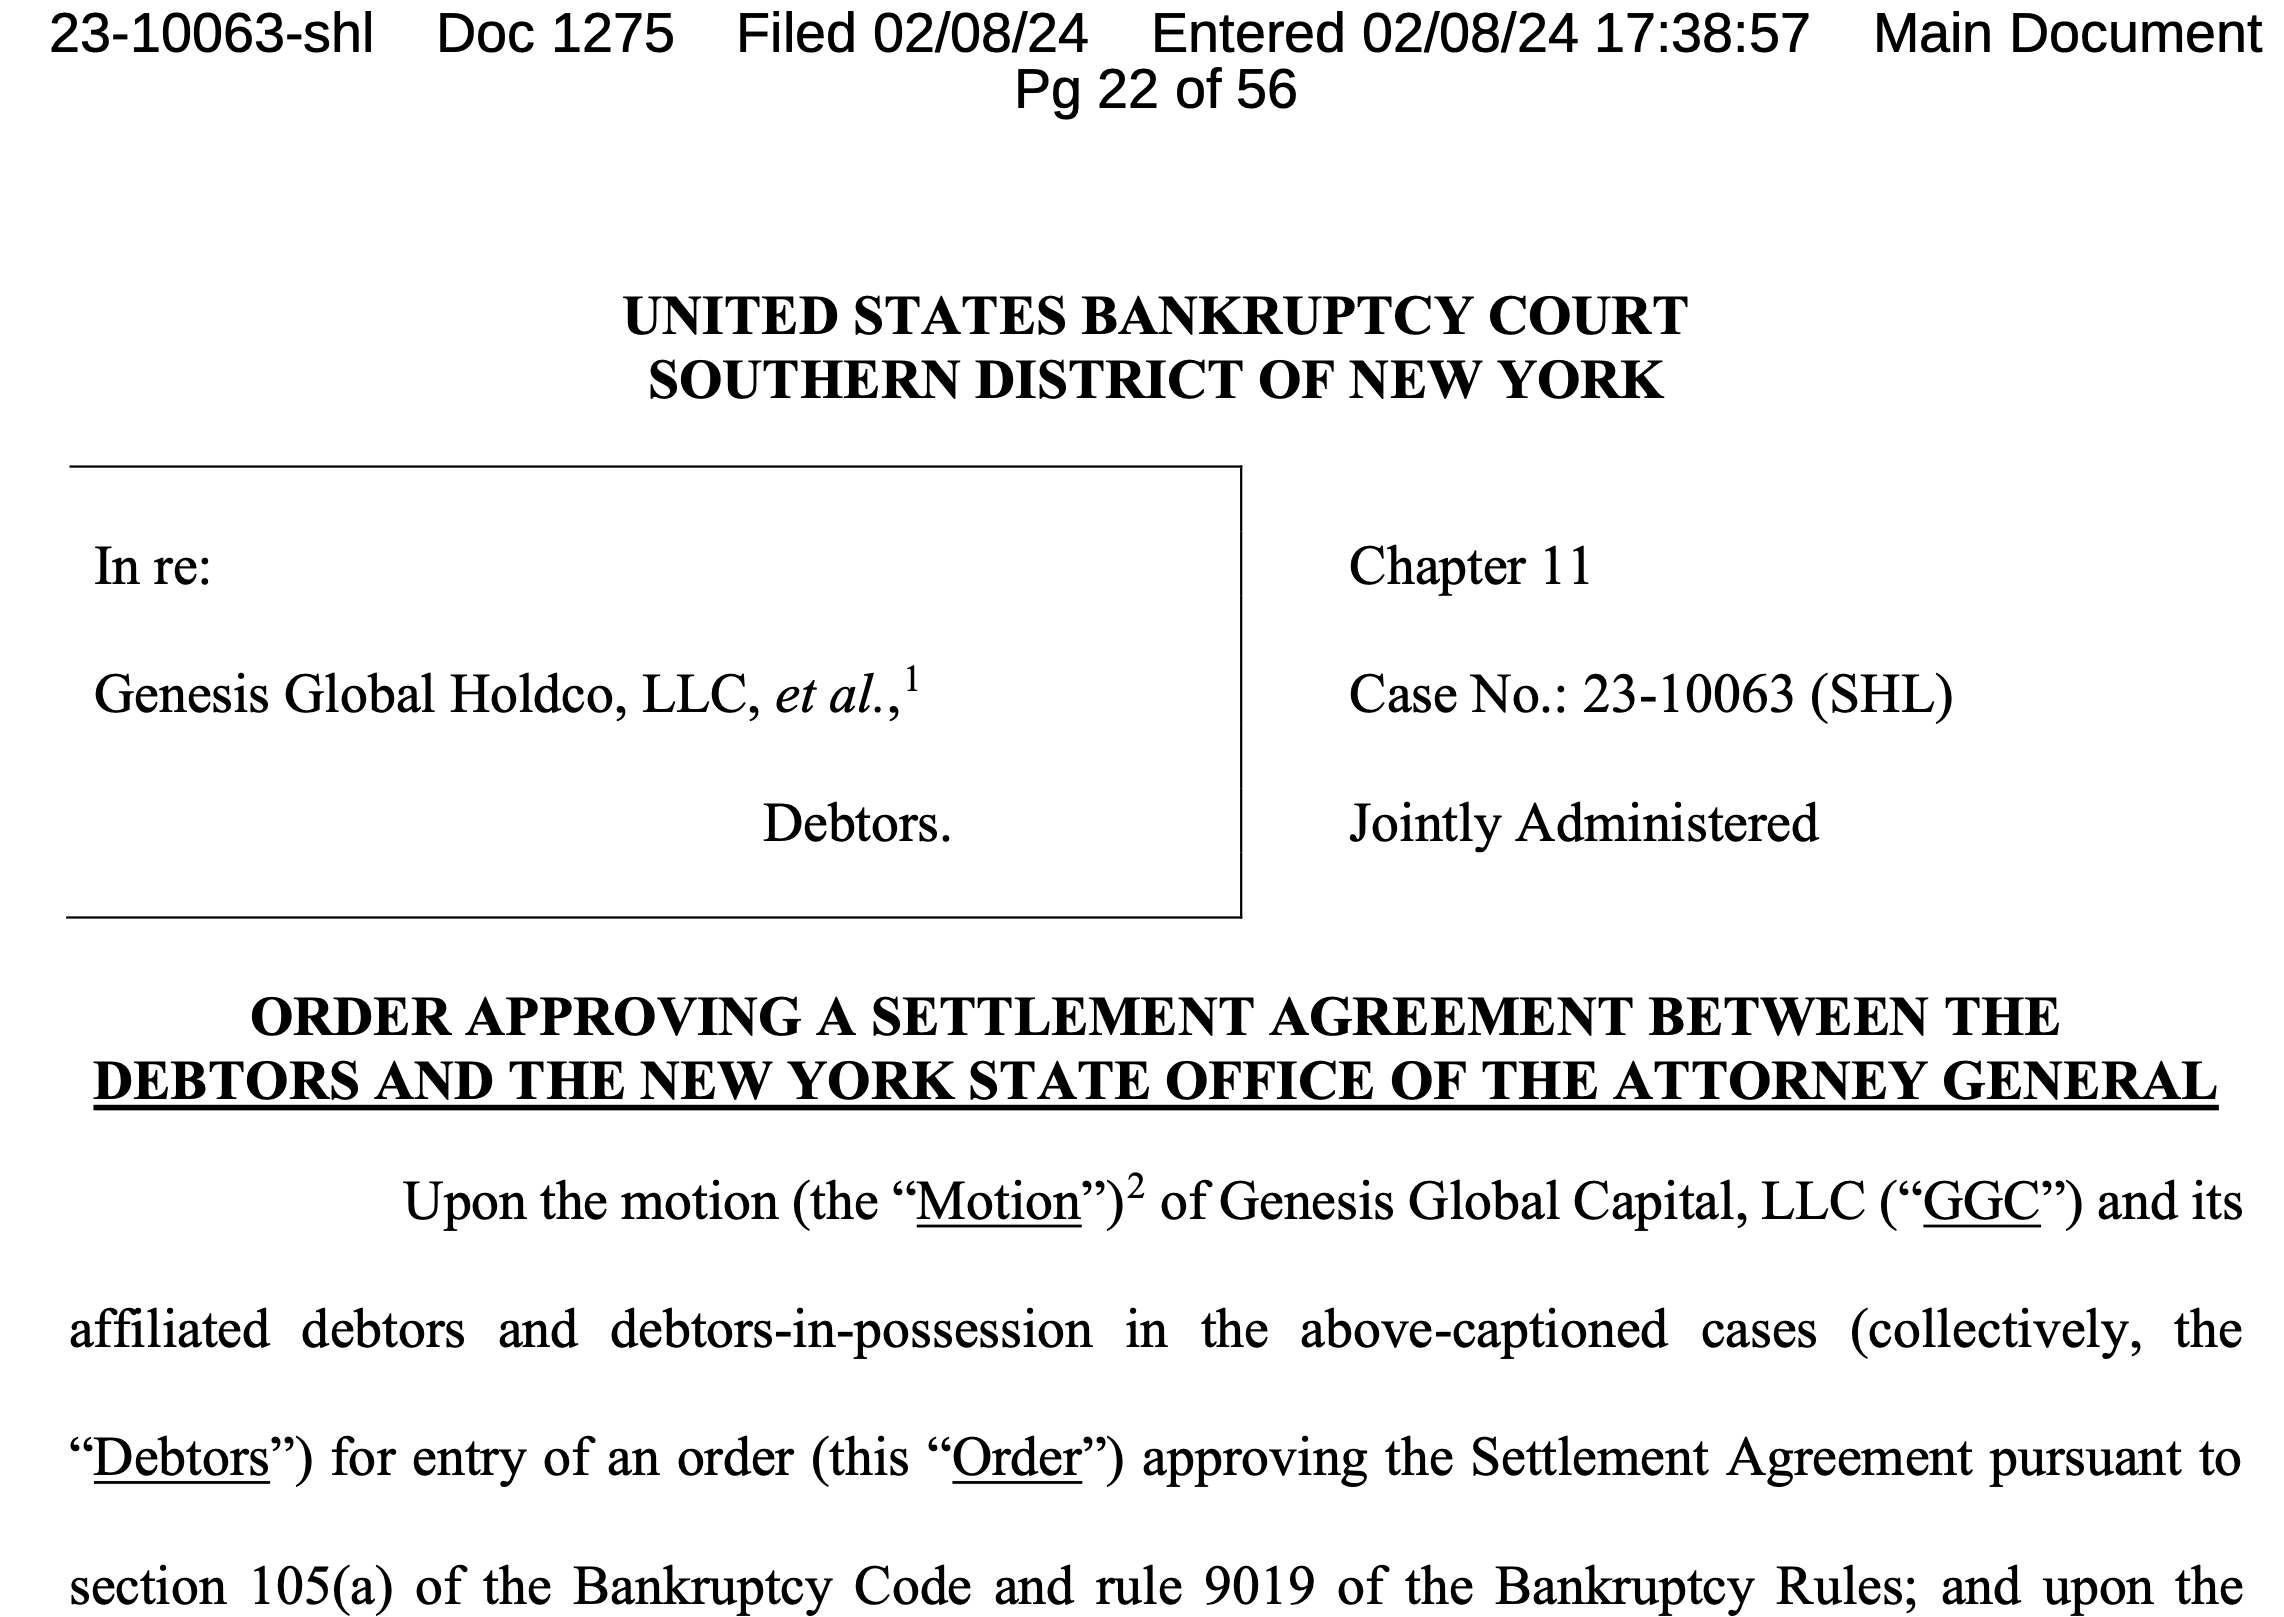 Genesis Global Holdco settlement with the NYAG